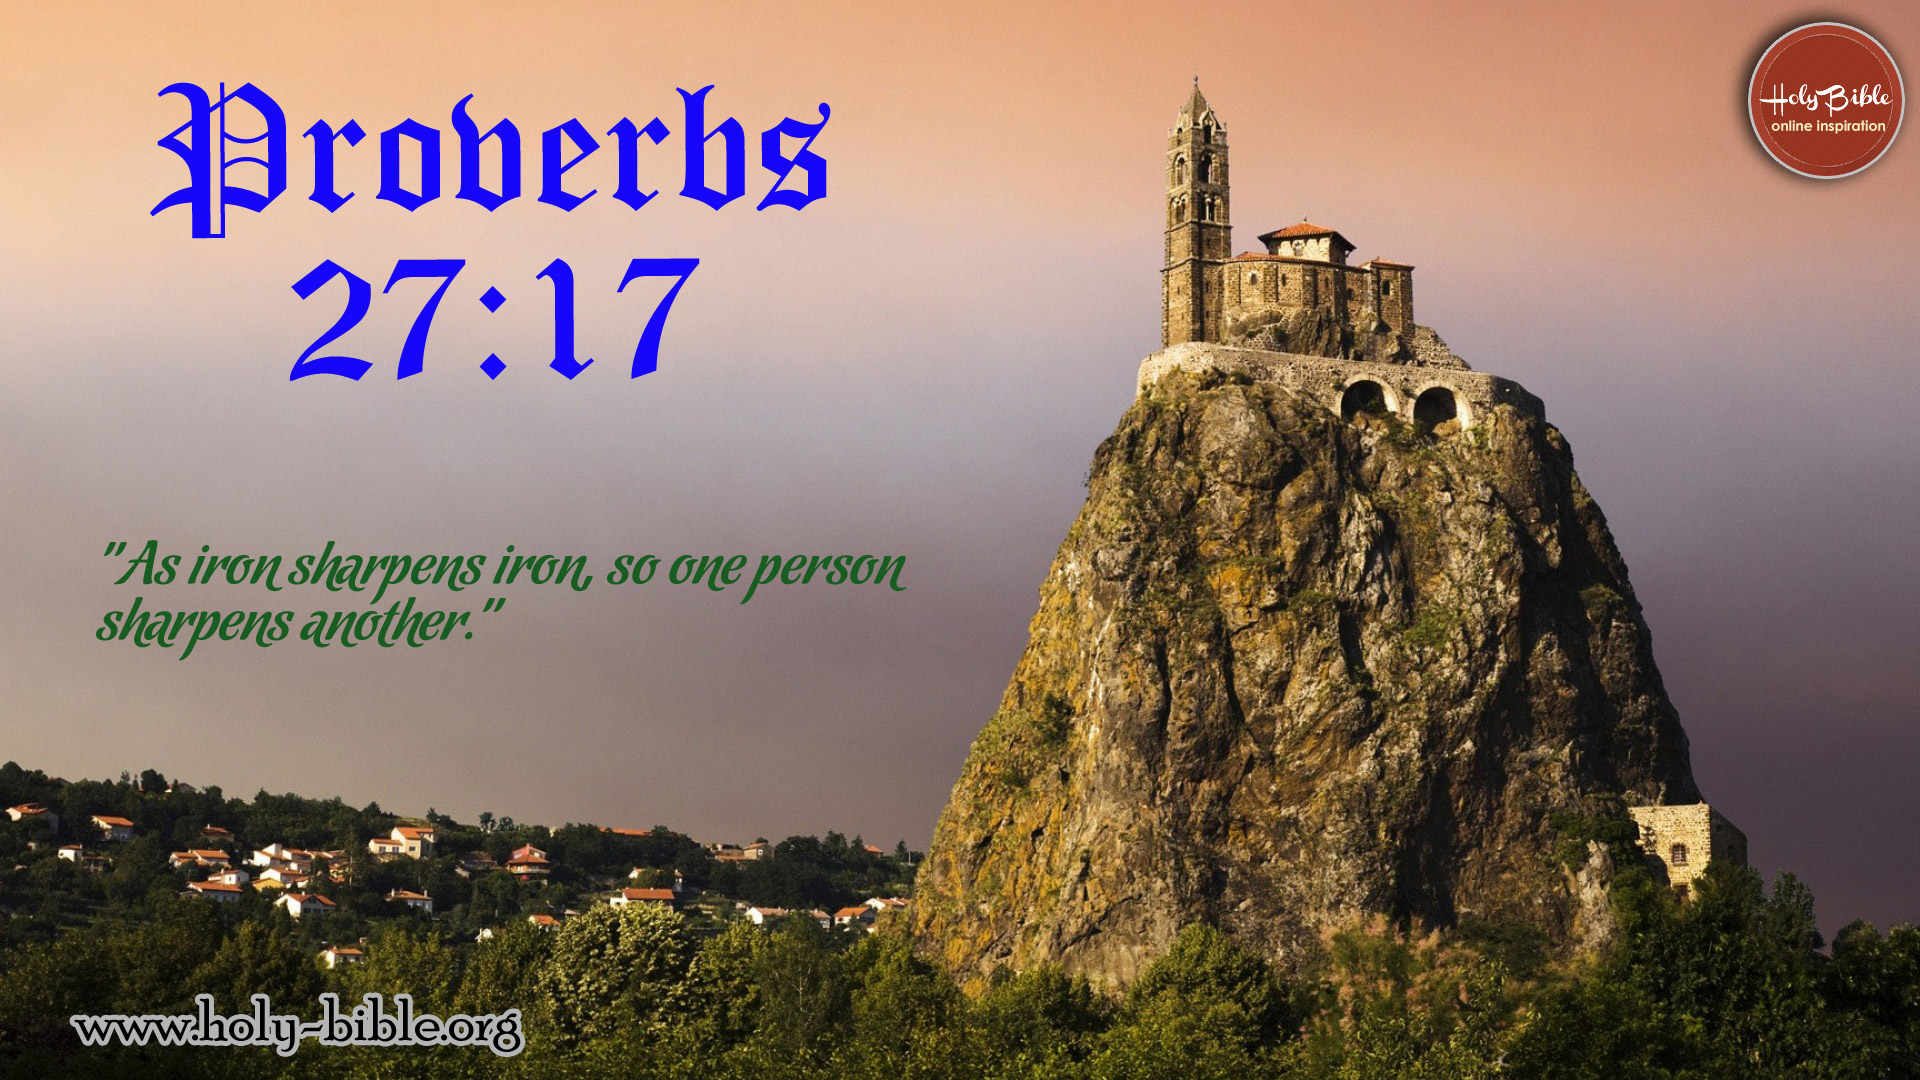 Bible Verse of the day – Proverbs 27:17